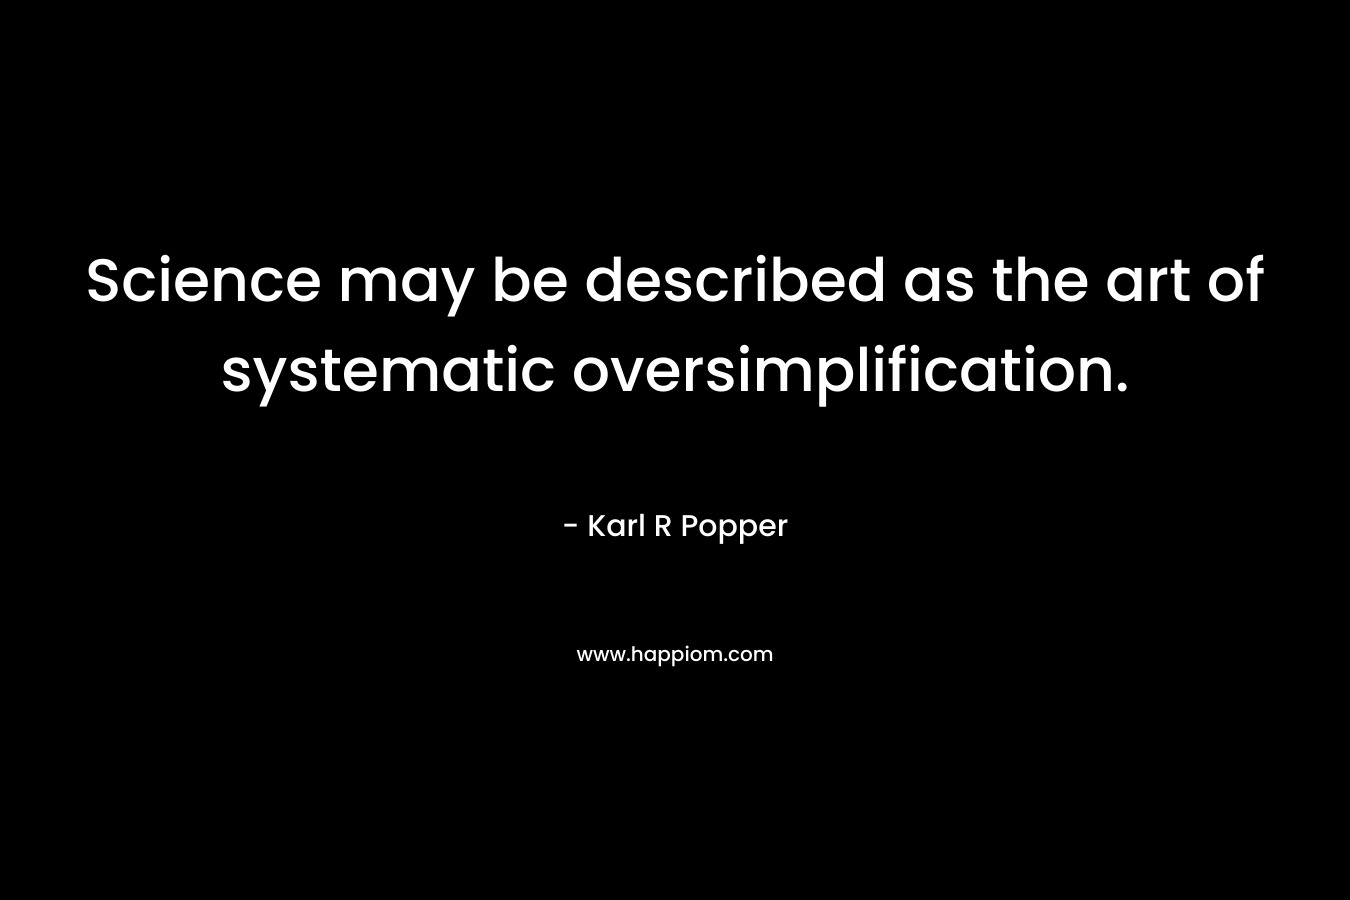 Science may be described as the art of systematic oversimplification. – Karl R Popper